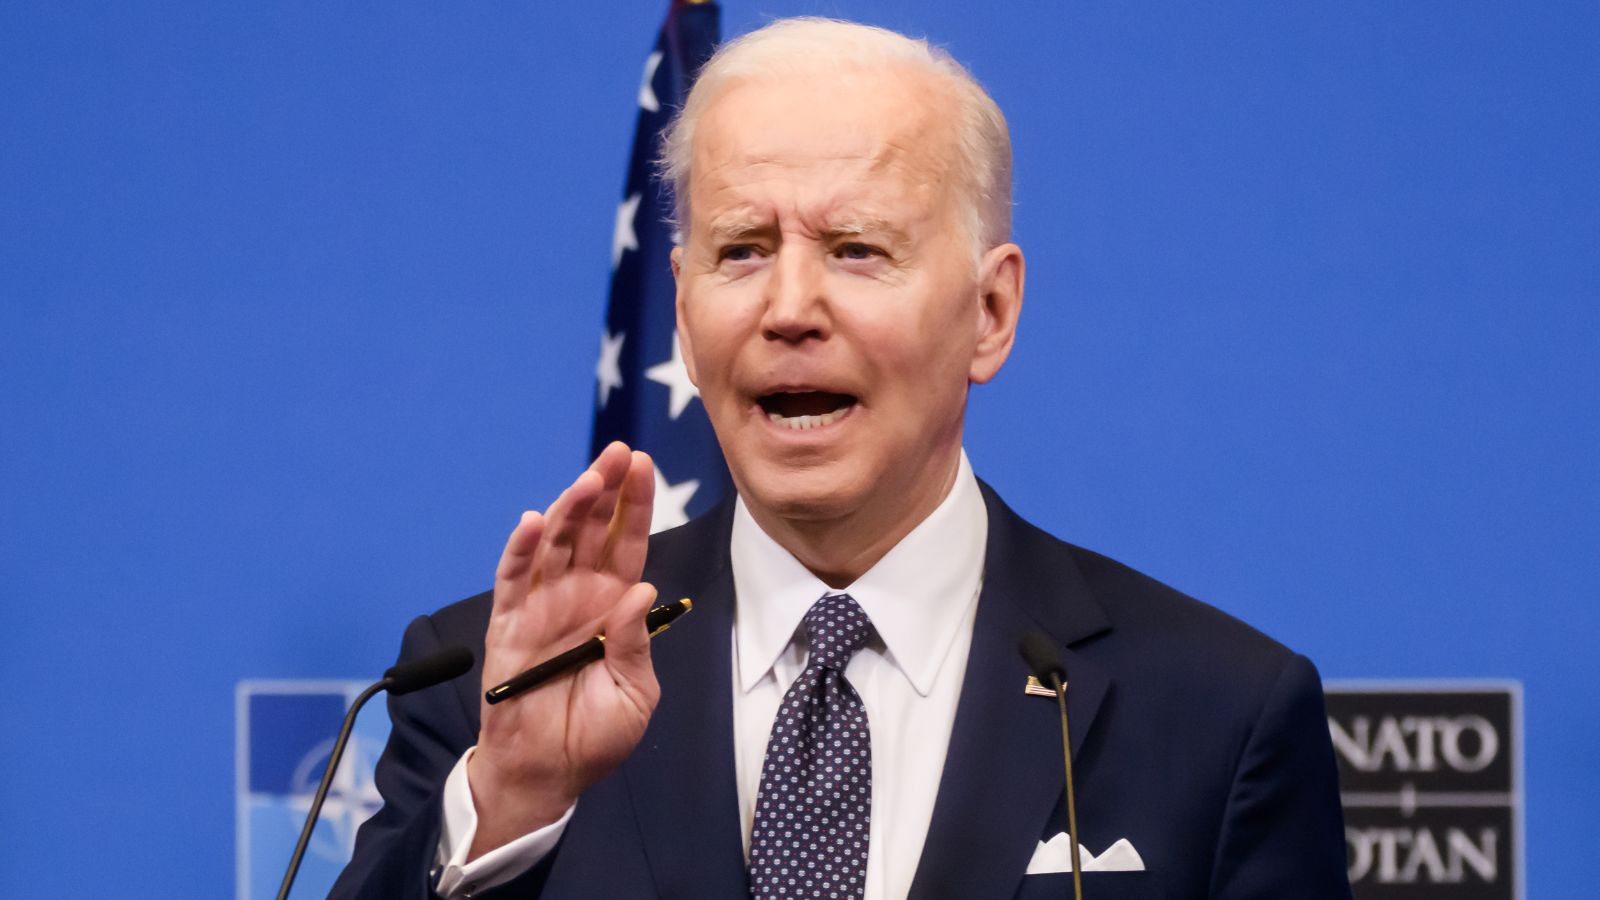 “A Moment of Crushing Irony”: Calls for Biden To Be Banned From the Internet